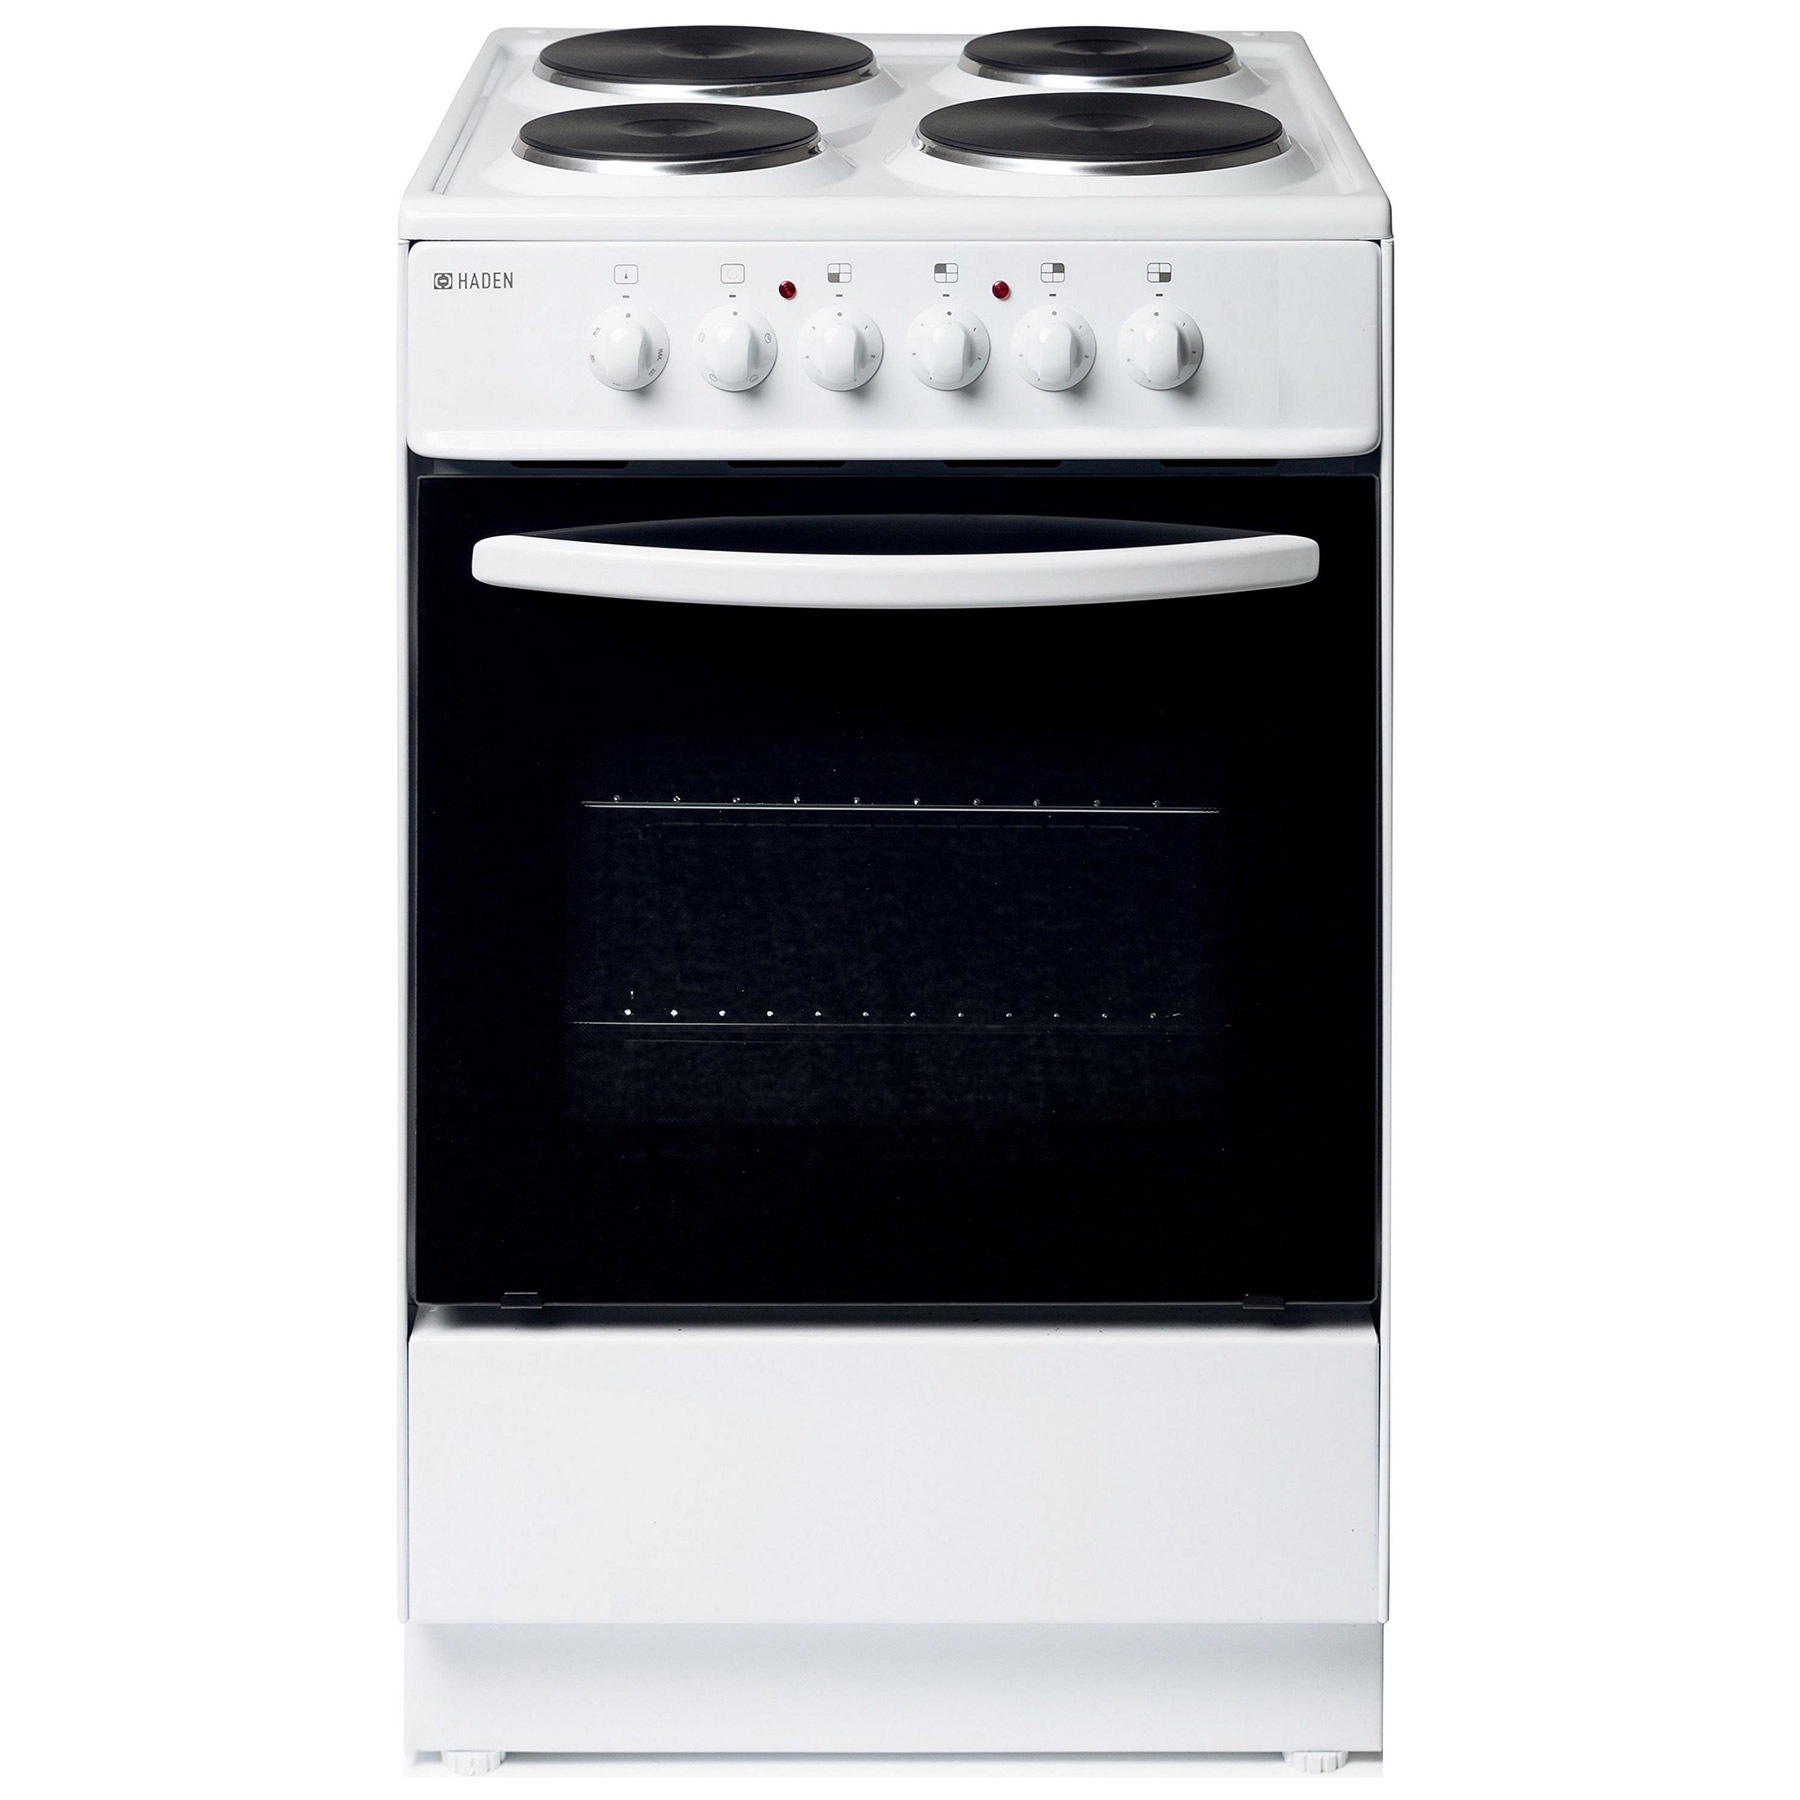 Image of Haden HES60W 60cm Single Oven Electric Cooker in White Solid Plate